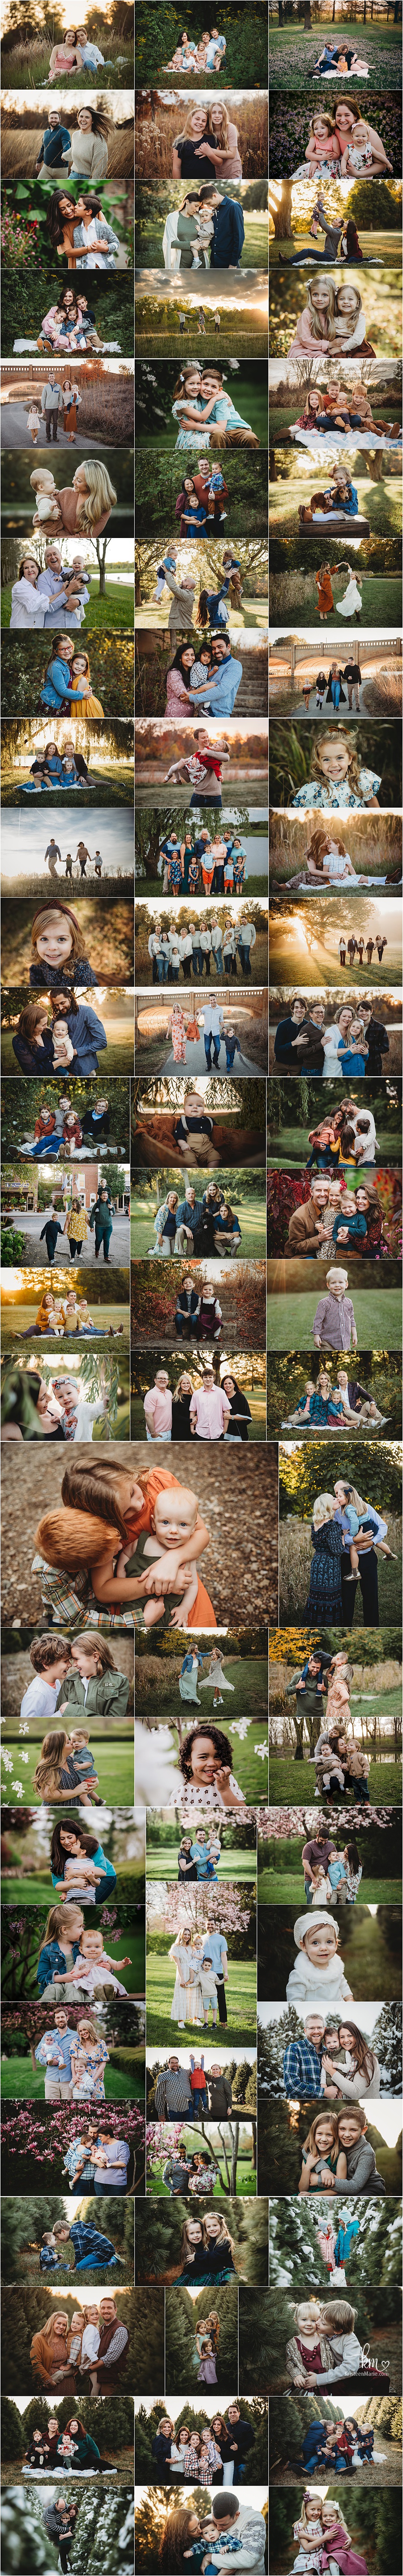 Family Photography in Indianapolis by KristeenMarie